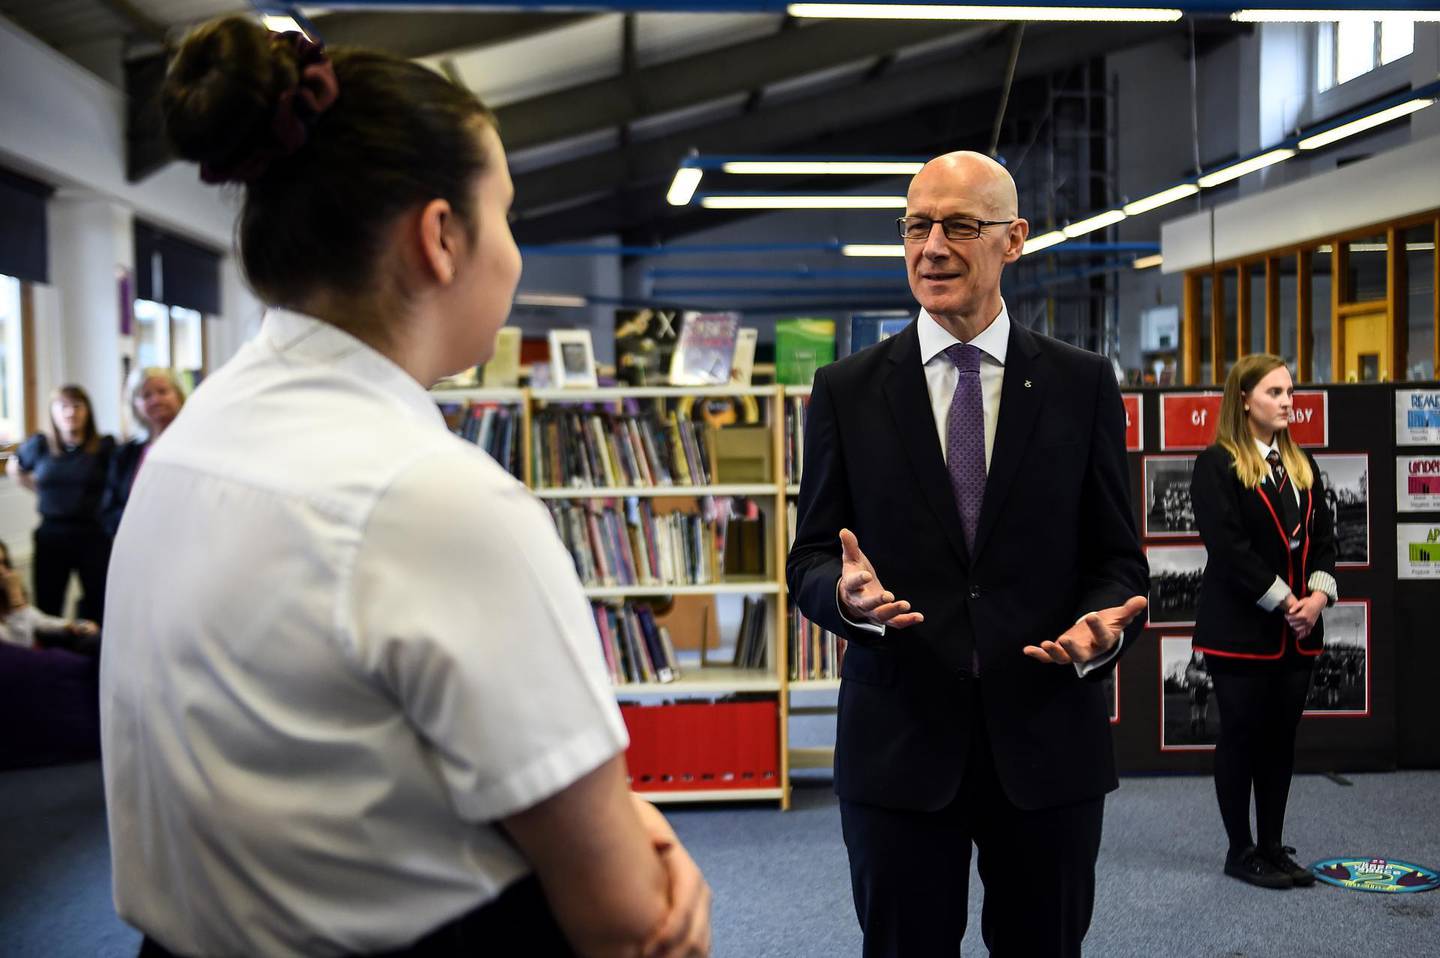 Deputy First Minister of Scotland and Cabinet Secretary for Education and Skills John Swinney visits Stonlelaw High School on the day pupils receive their exam results, in Rutherglen, Glasgow, Scotland, Britain, August 4, 2020. Exams were cancelled in Scotland due to the coronavirus pandemic and pupils have been awarded grades based on assessment. Andy Buchanan/Pool via REUTERS